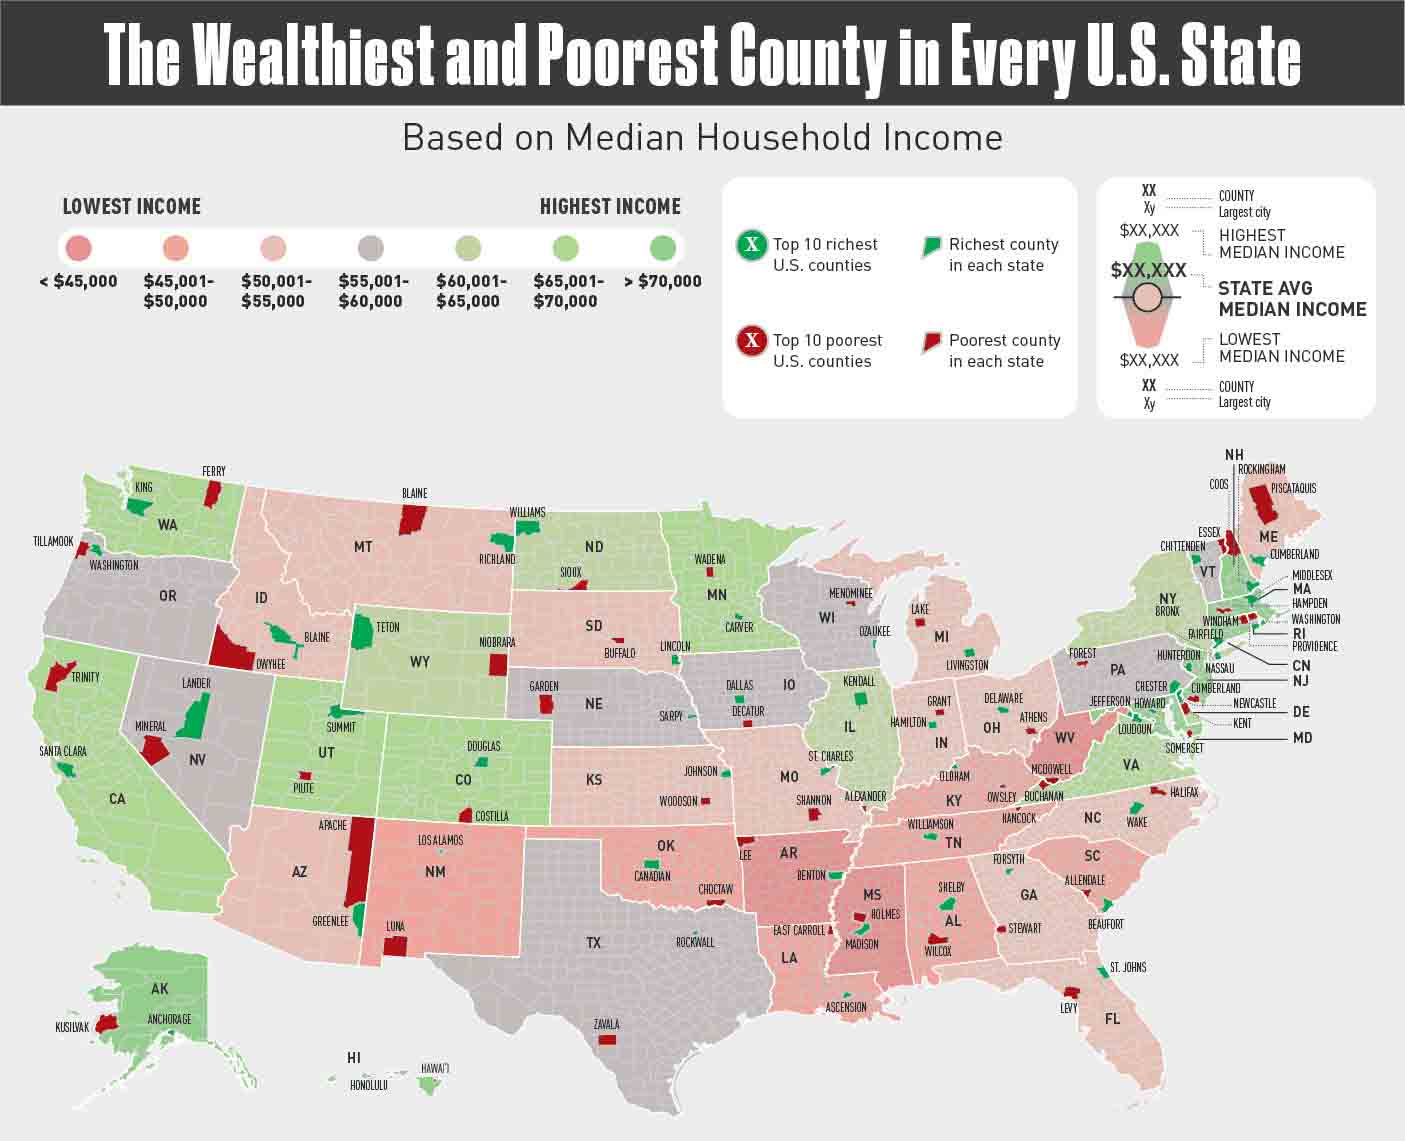 The Wealthiest and Poorest County in Every U.S. State [Infographic]